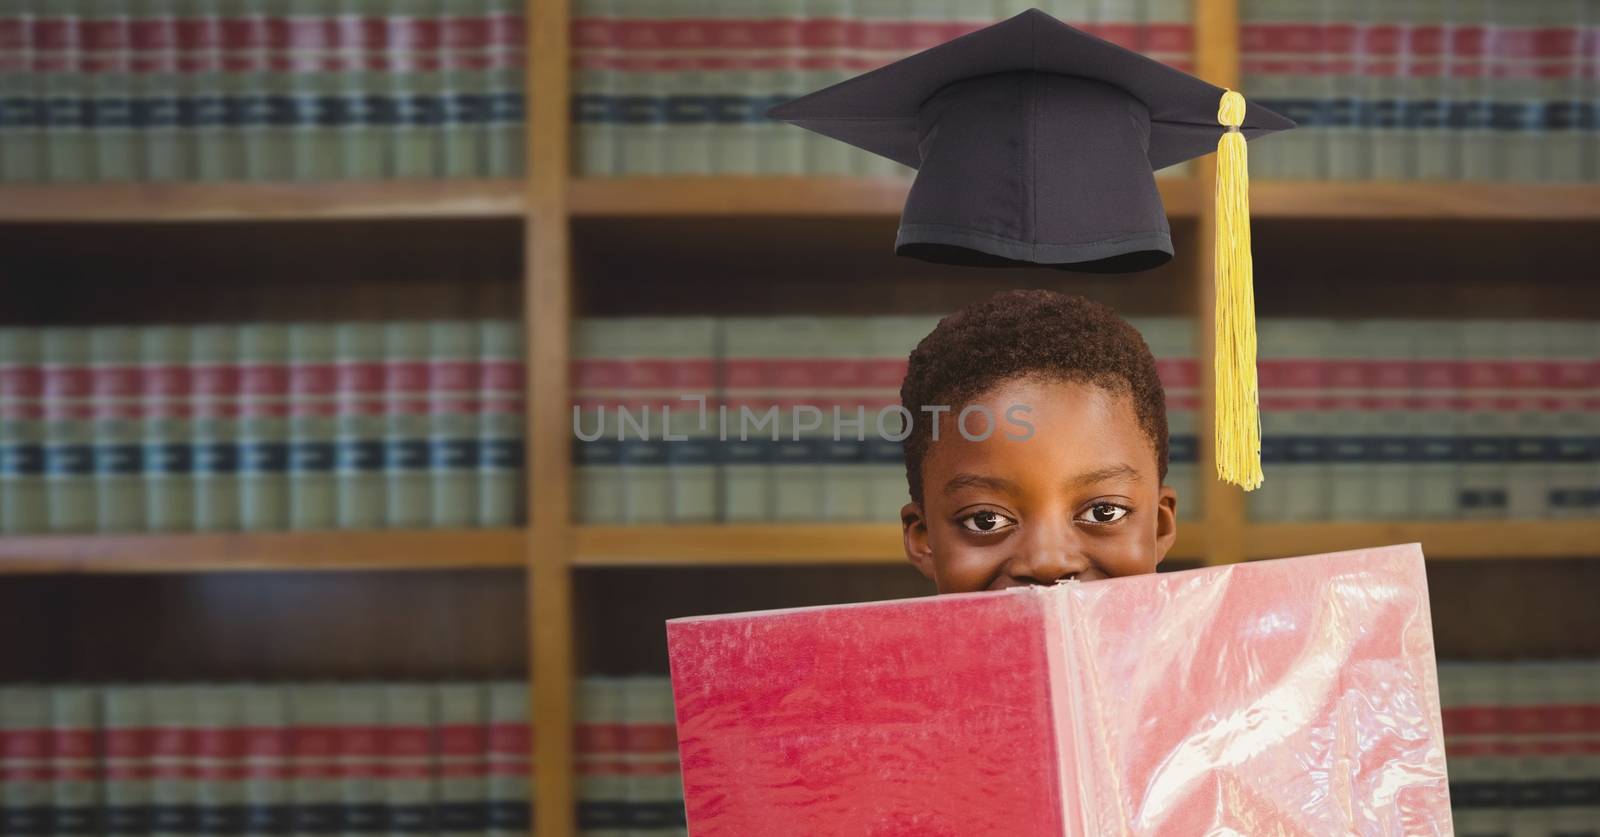 Boy with graduation hat in education library by Wavebreakmedia